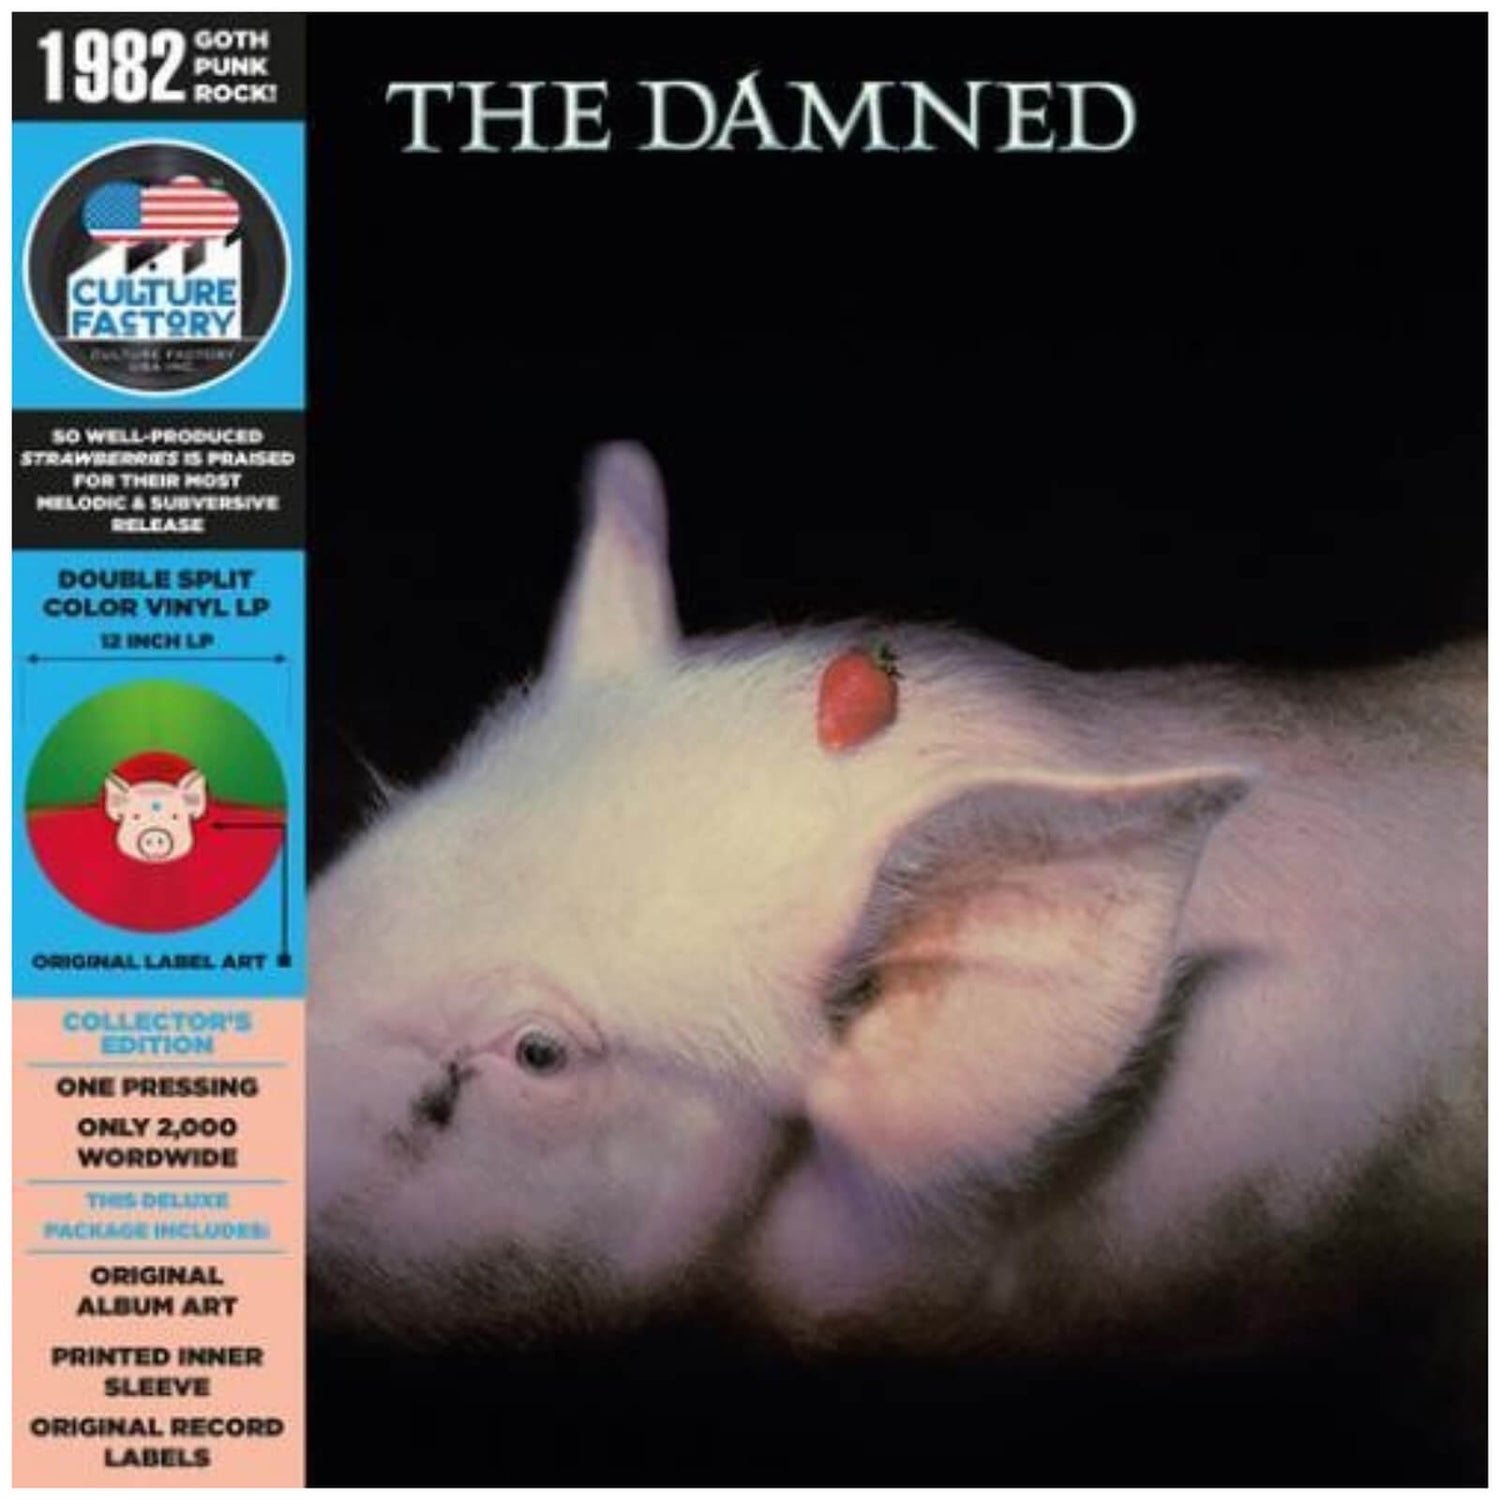 The Damned - Strawberries Vinyl (Red & Green)